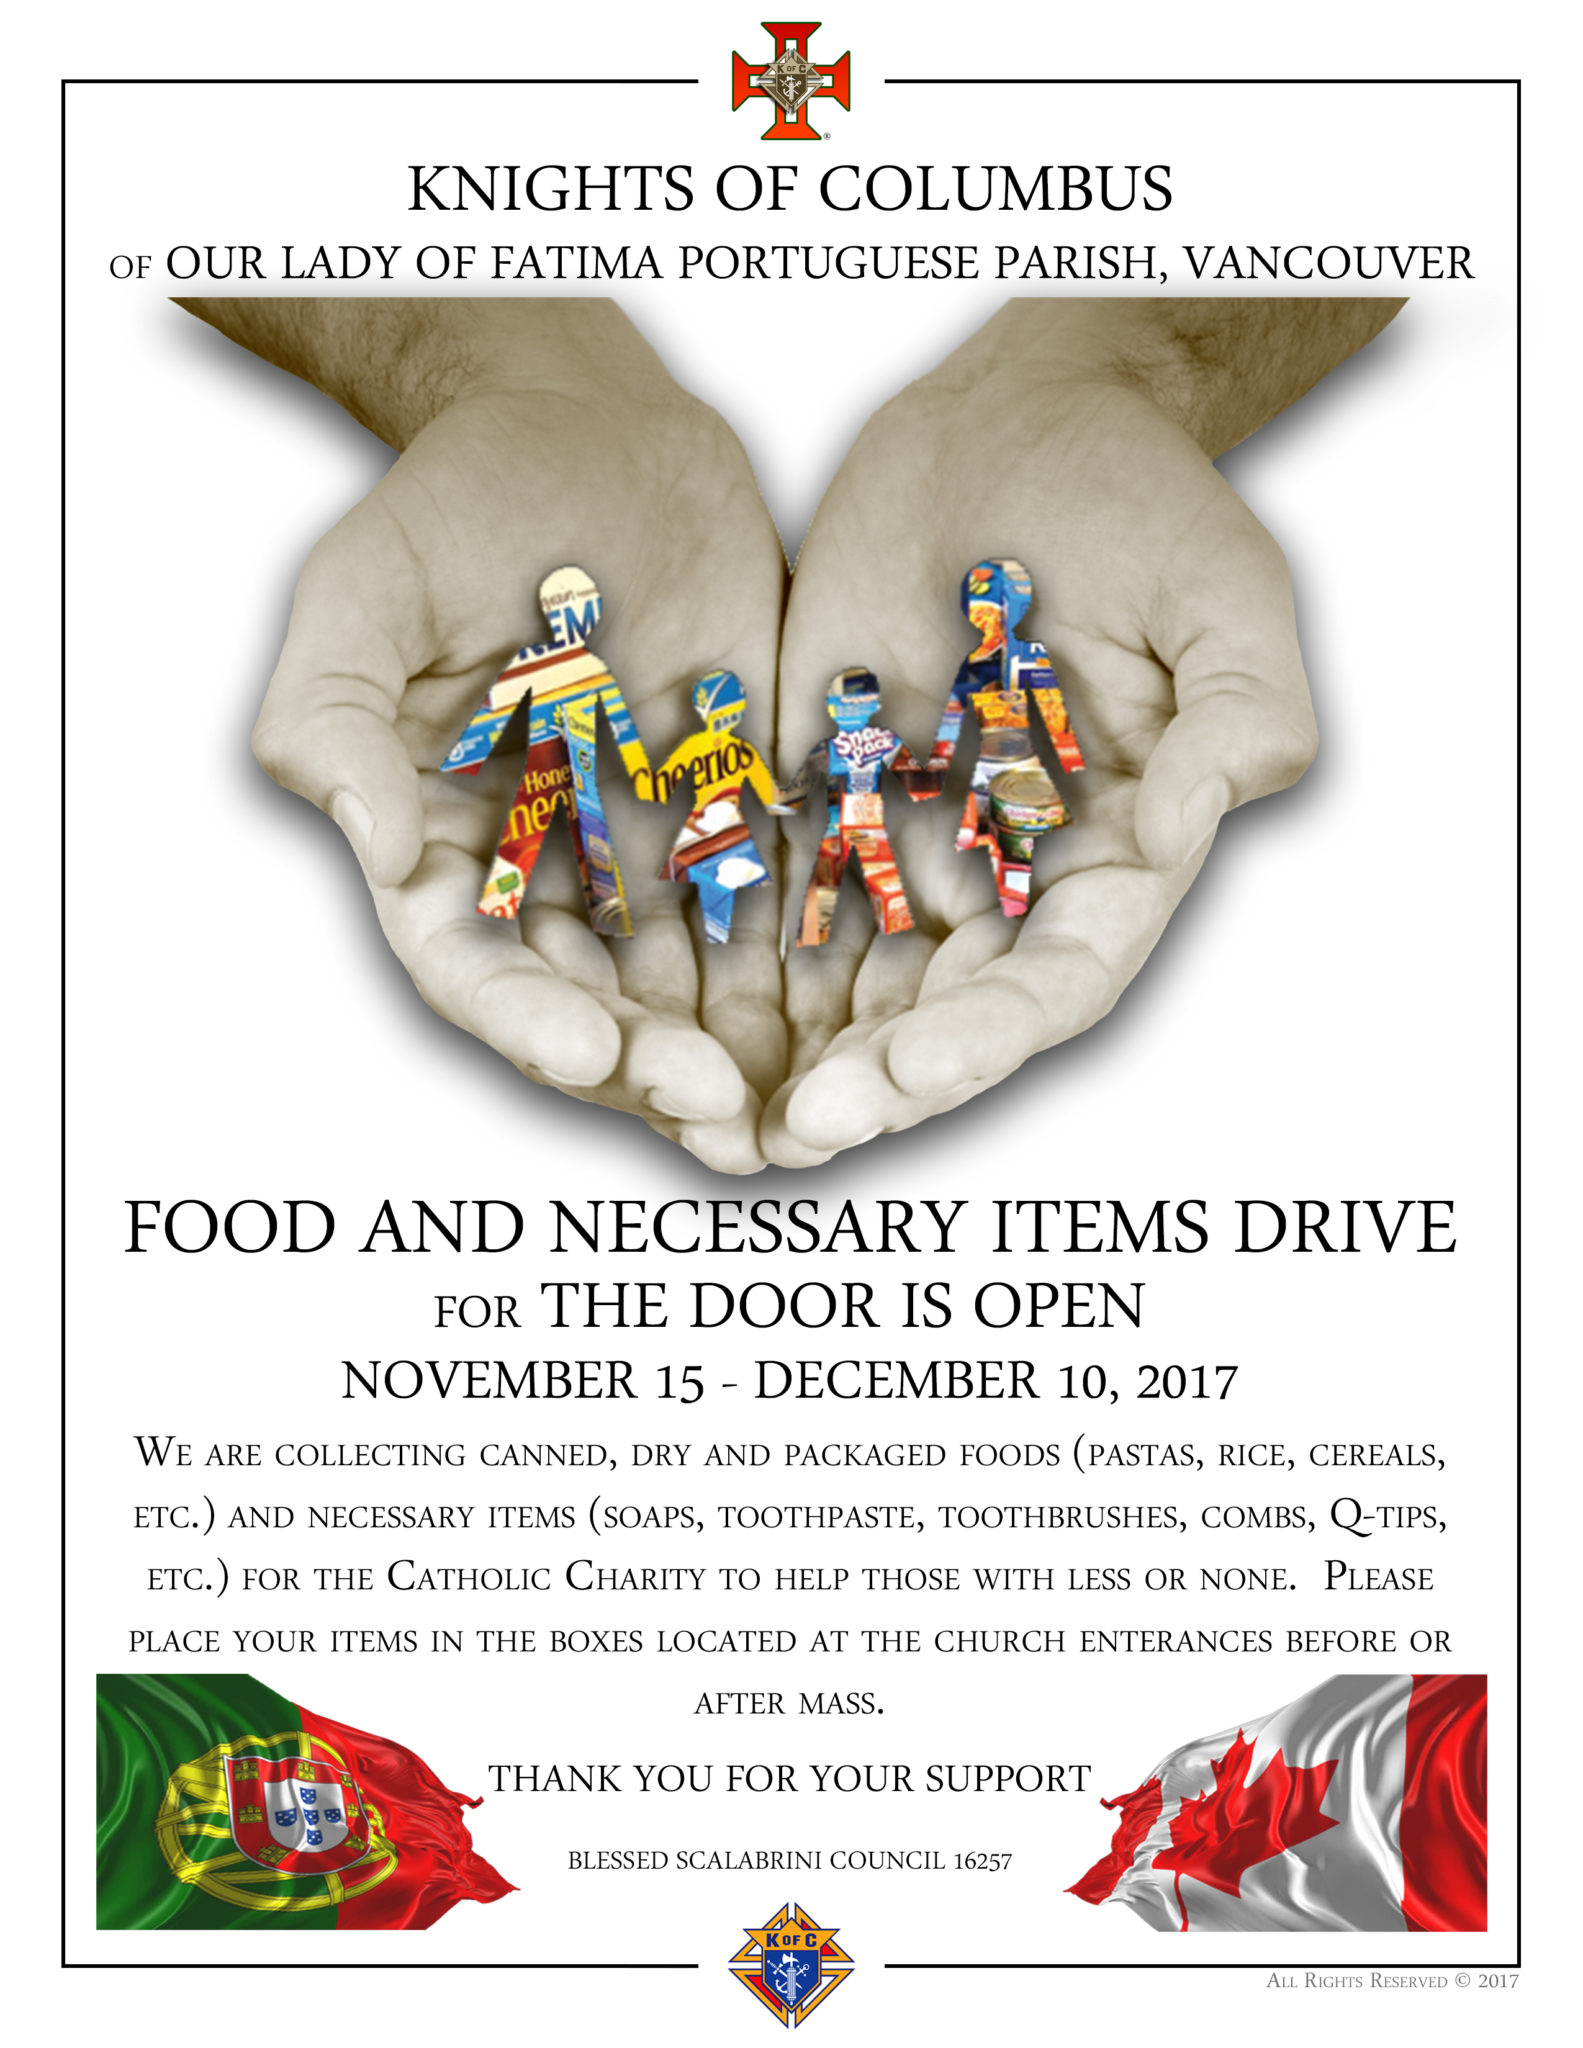 The Knights of Columbus Food & Necessary Items Drive